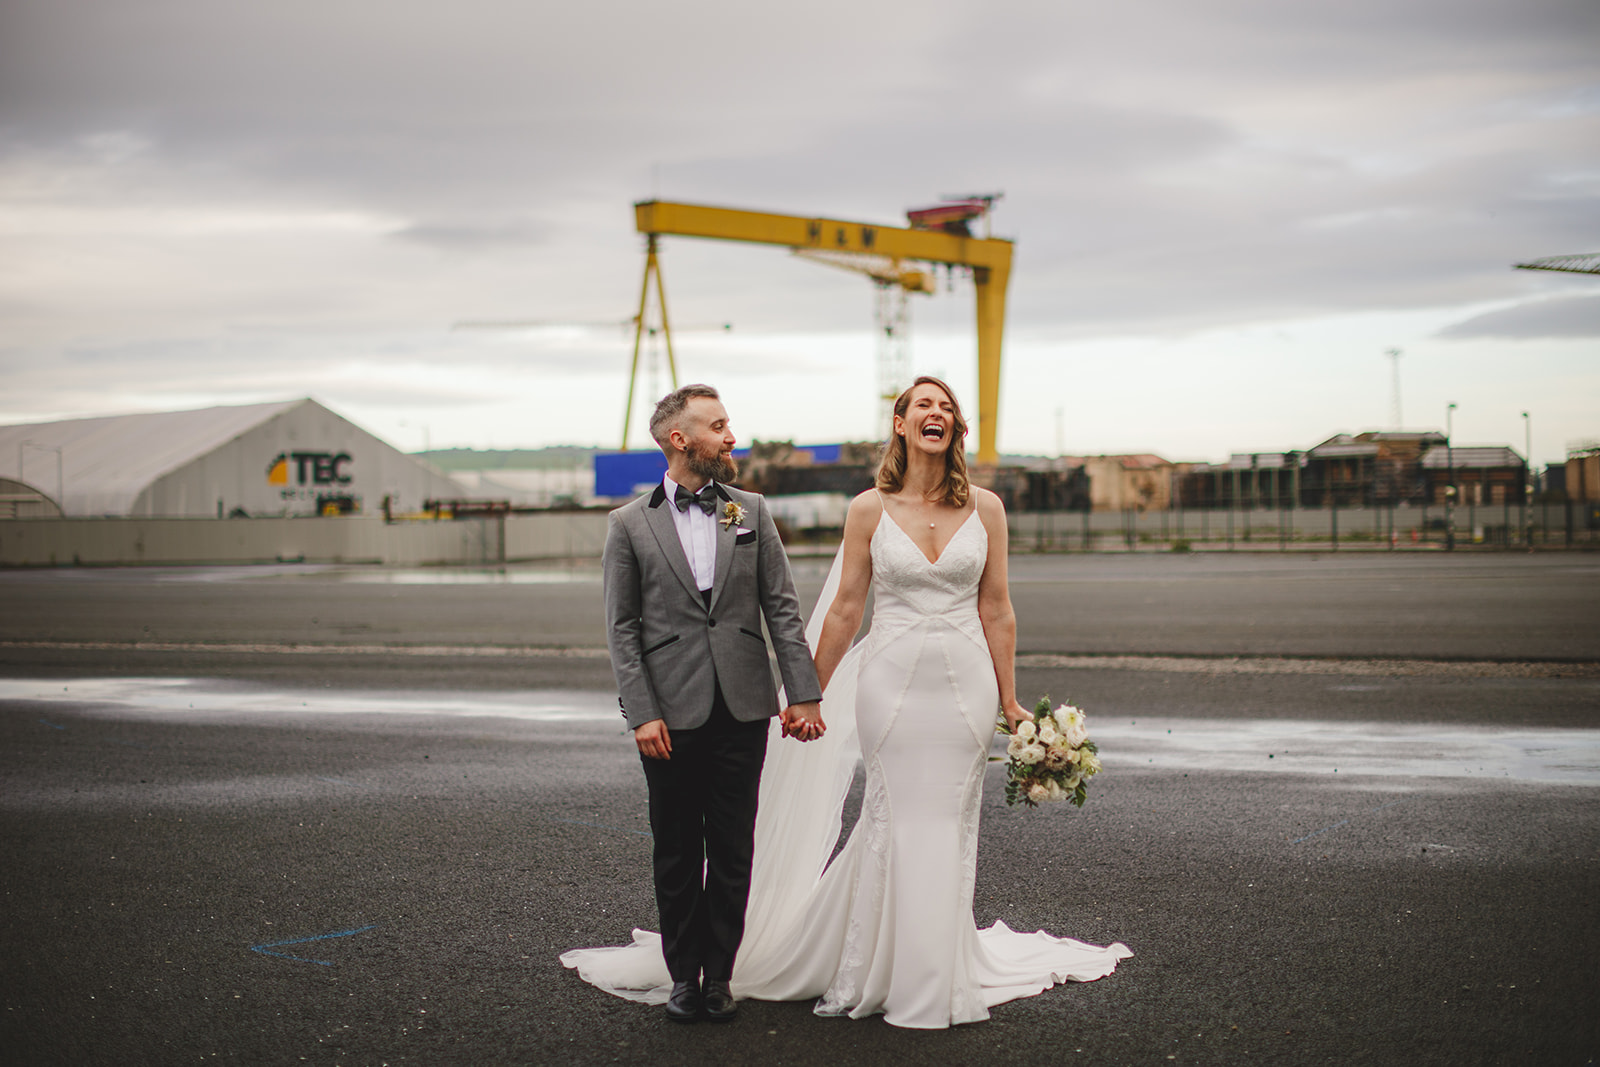 Couple Portraits on their wedding day by iconic Harland & Wolff cranes at Titanic Hotel Belfast